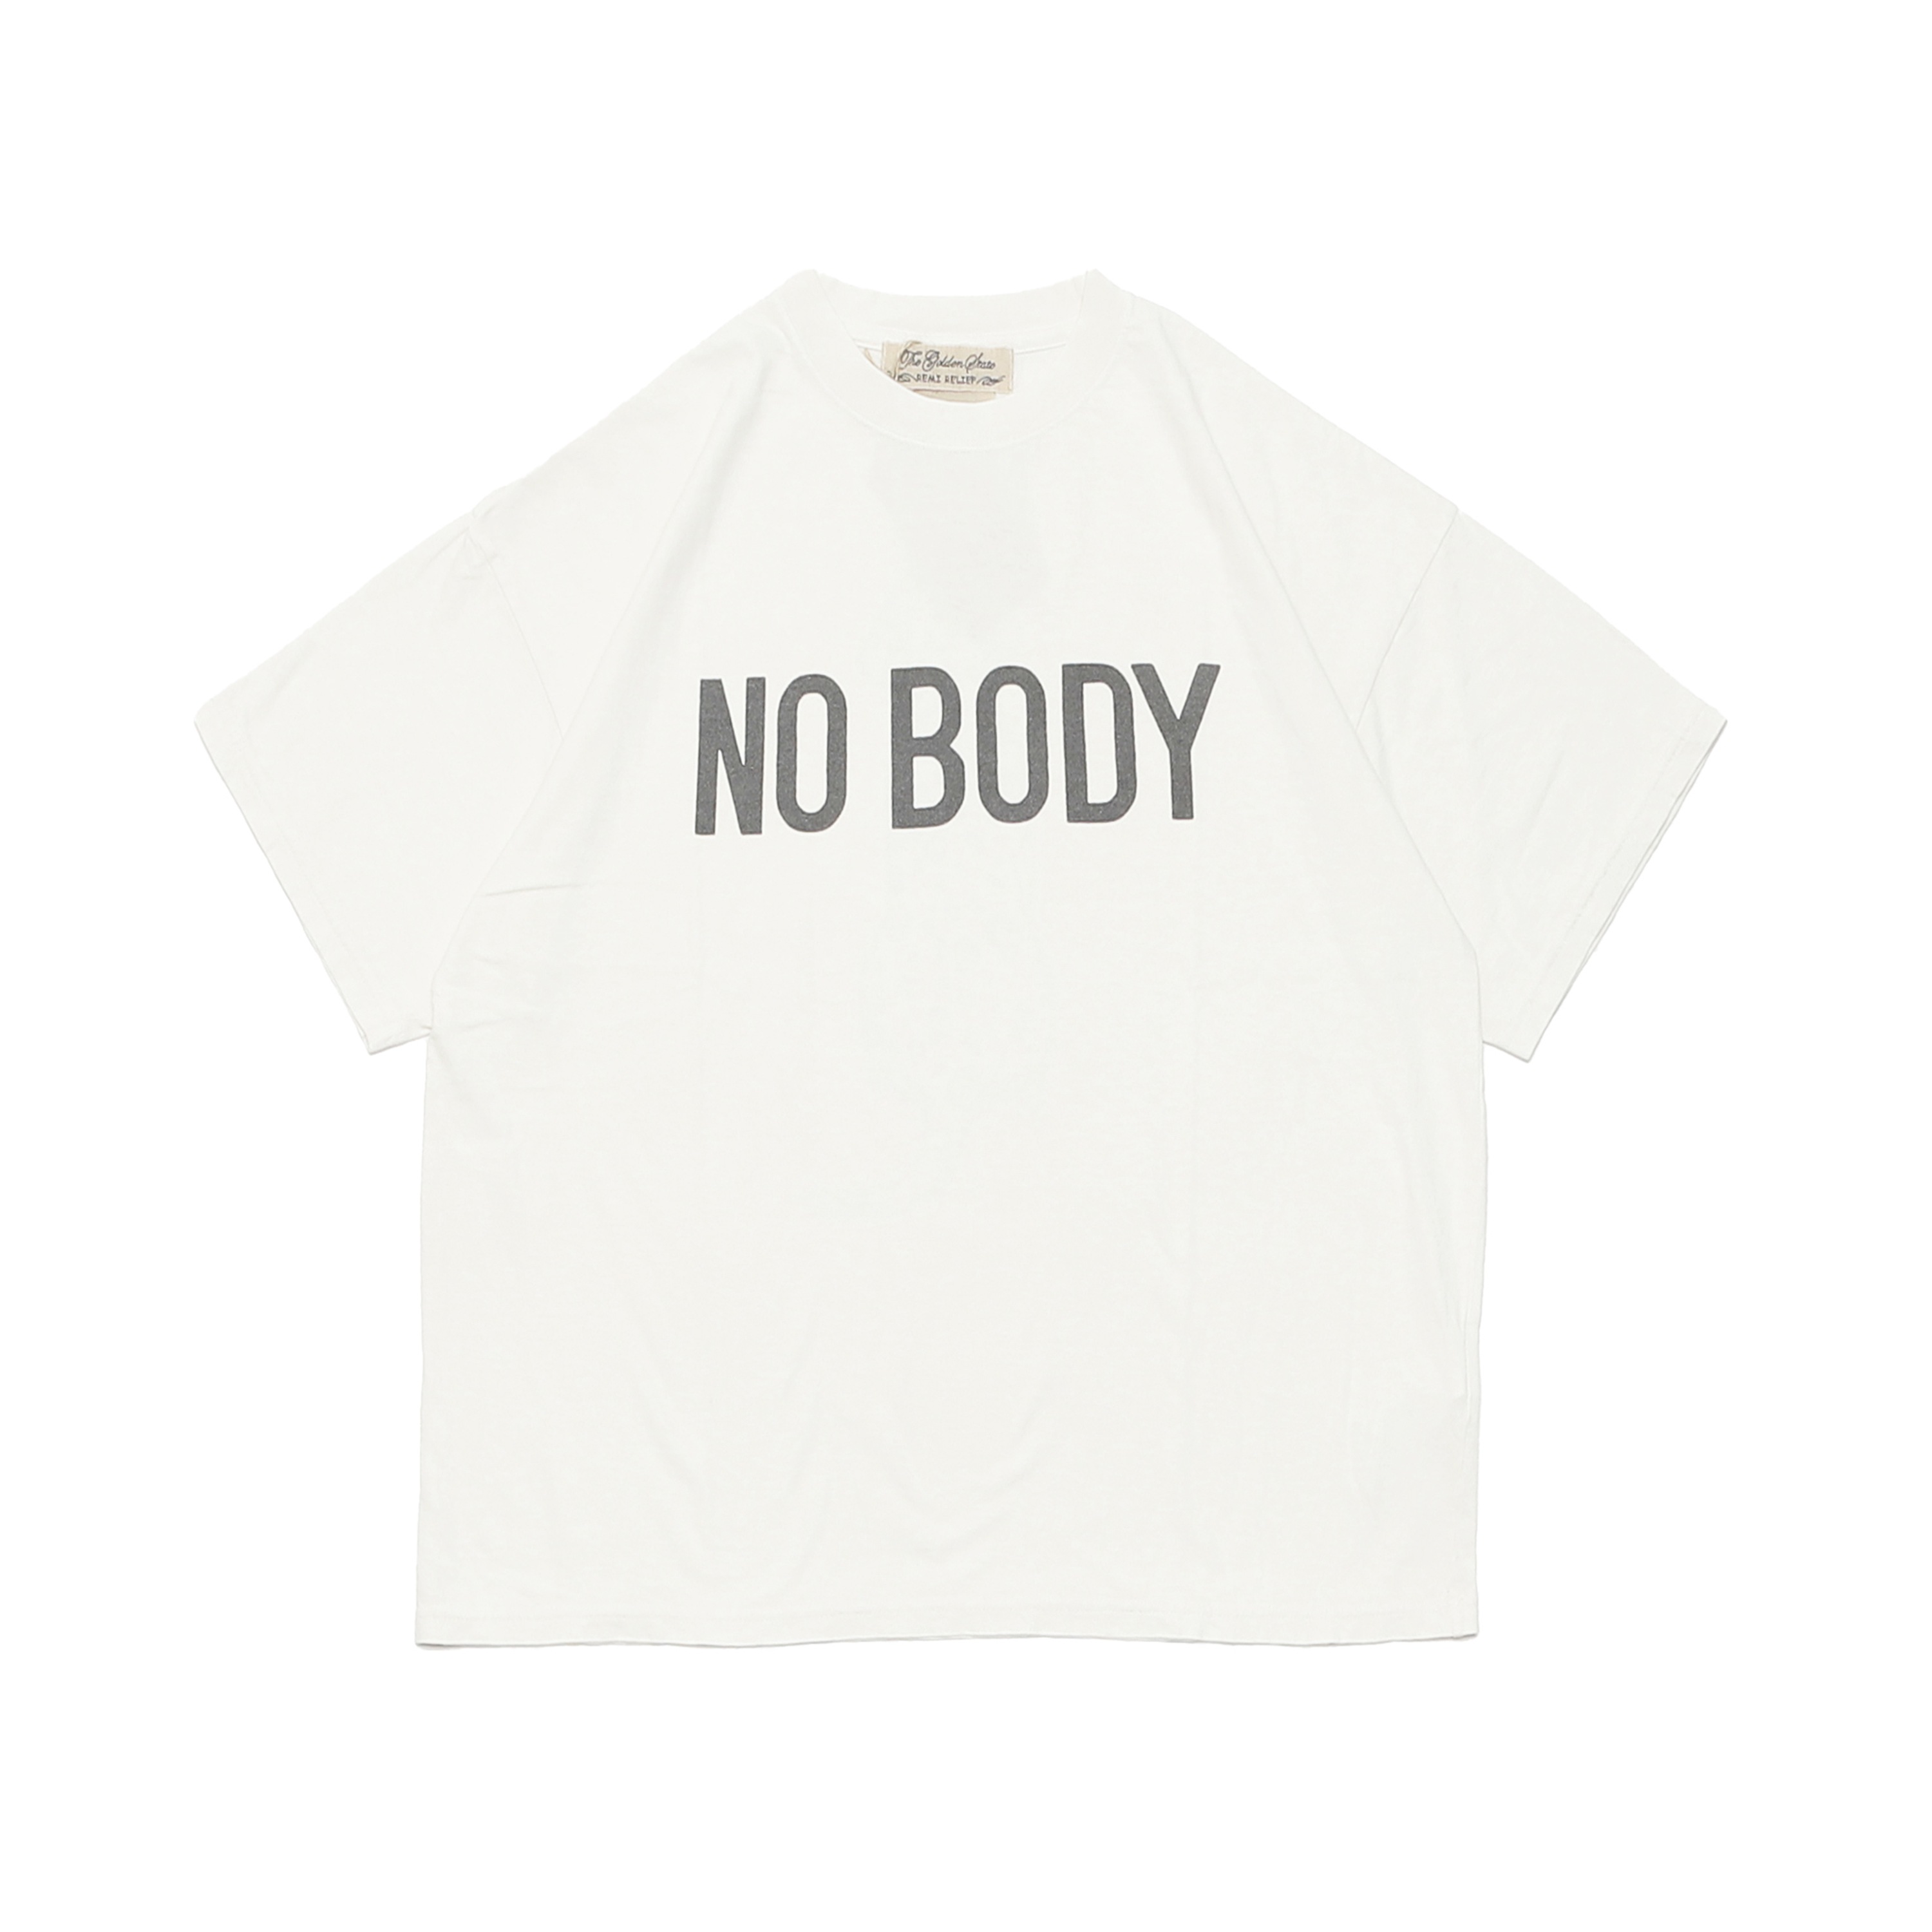 HARD SP FINISH 20 JERSEY BIG SIZE S/S TEE - NO BODY OFF WHITE